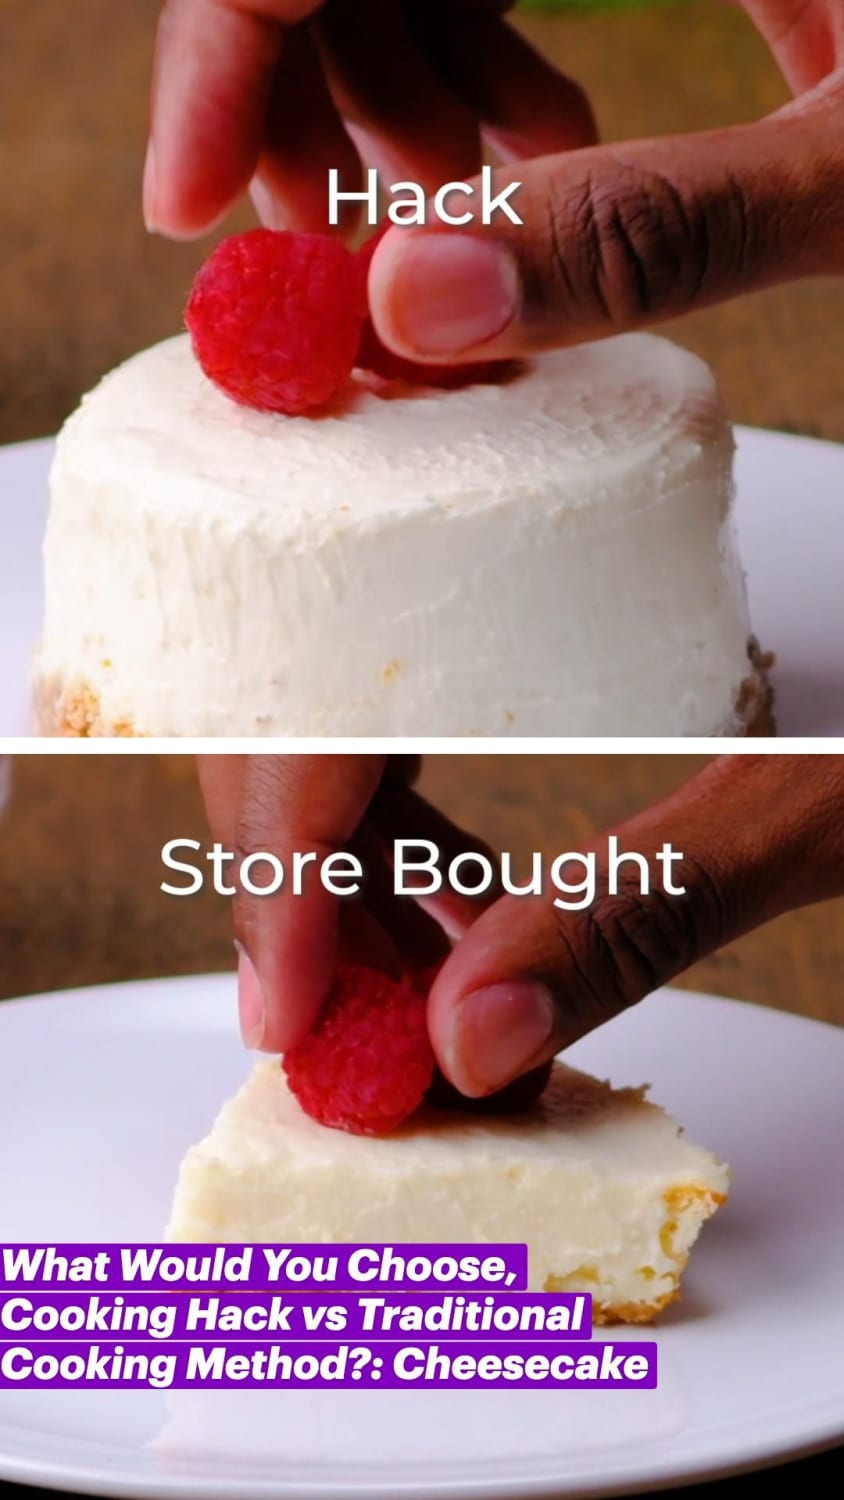 What Would You Choose Cooking Hack vs TraditionalCooking Method?: Cheesecake